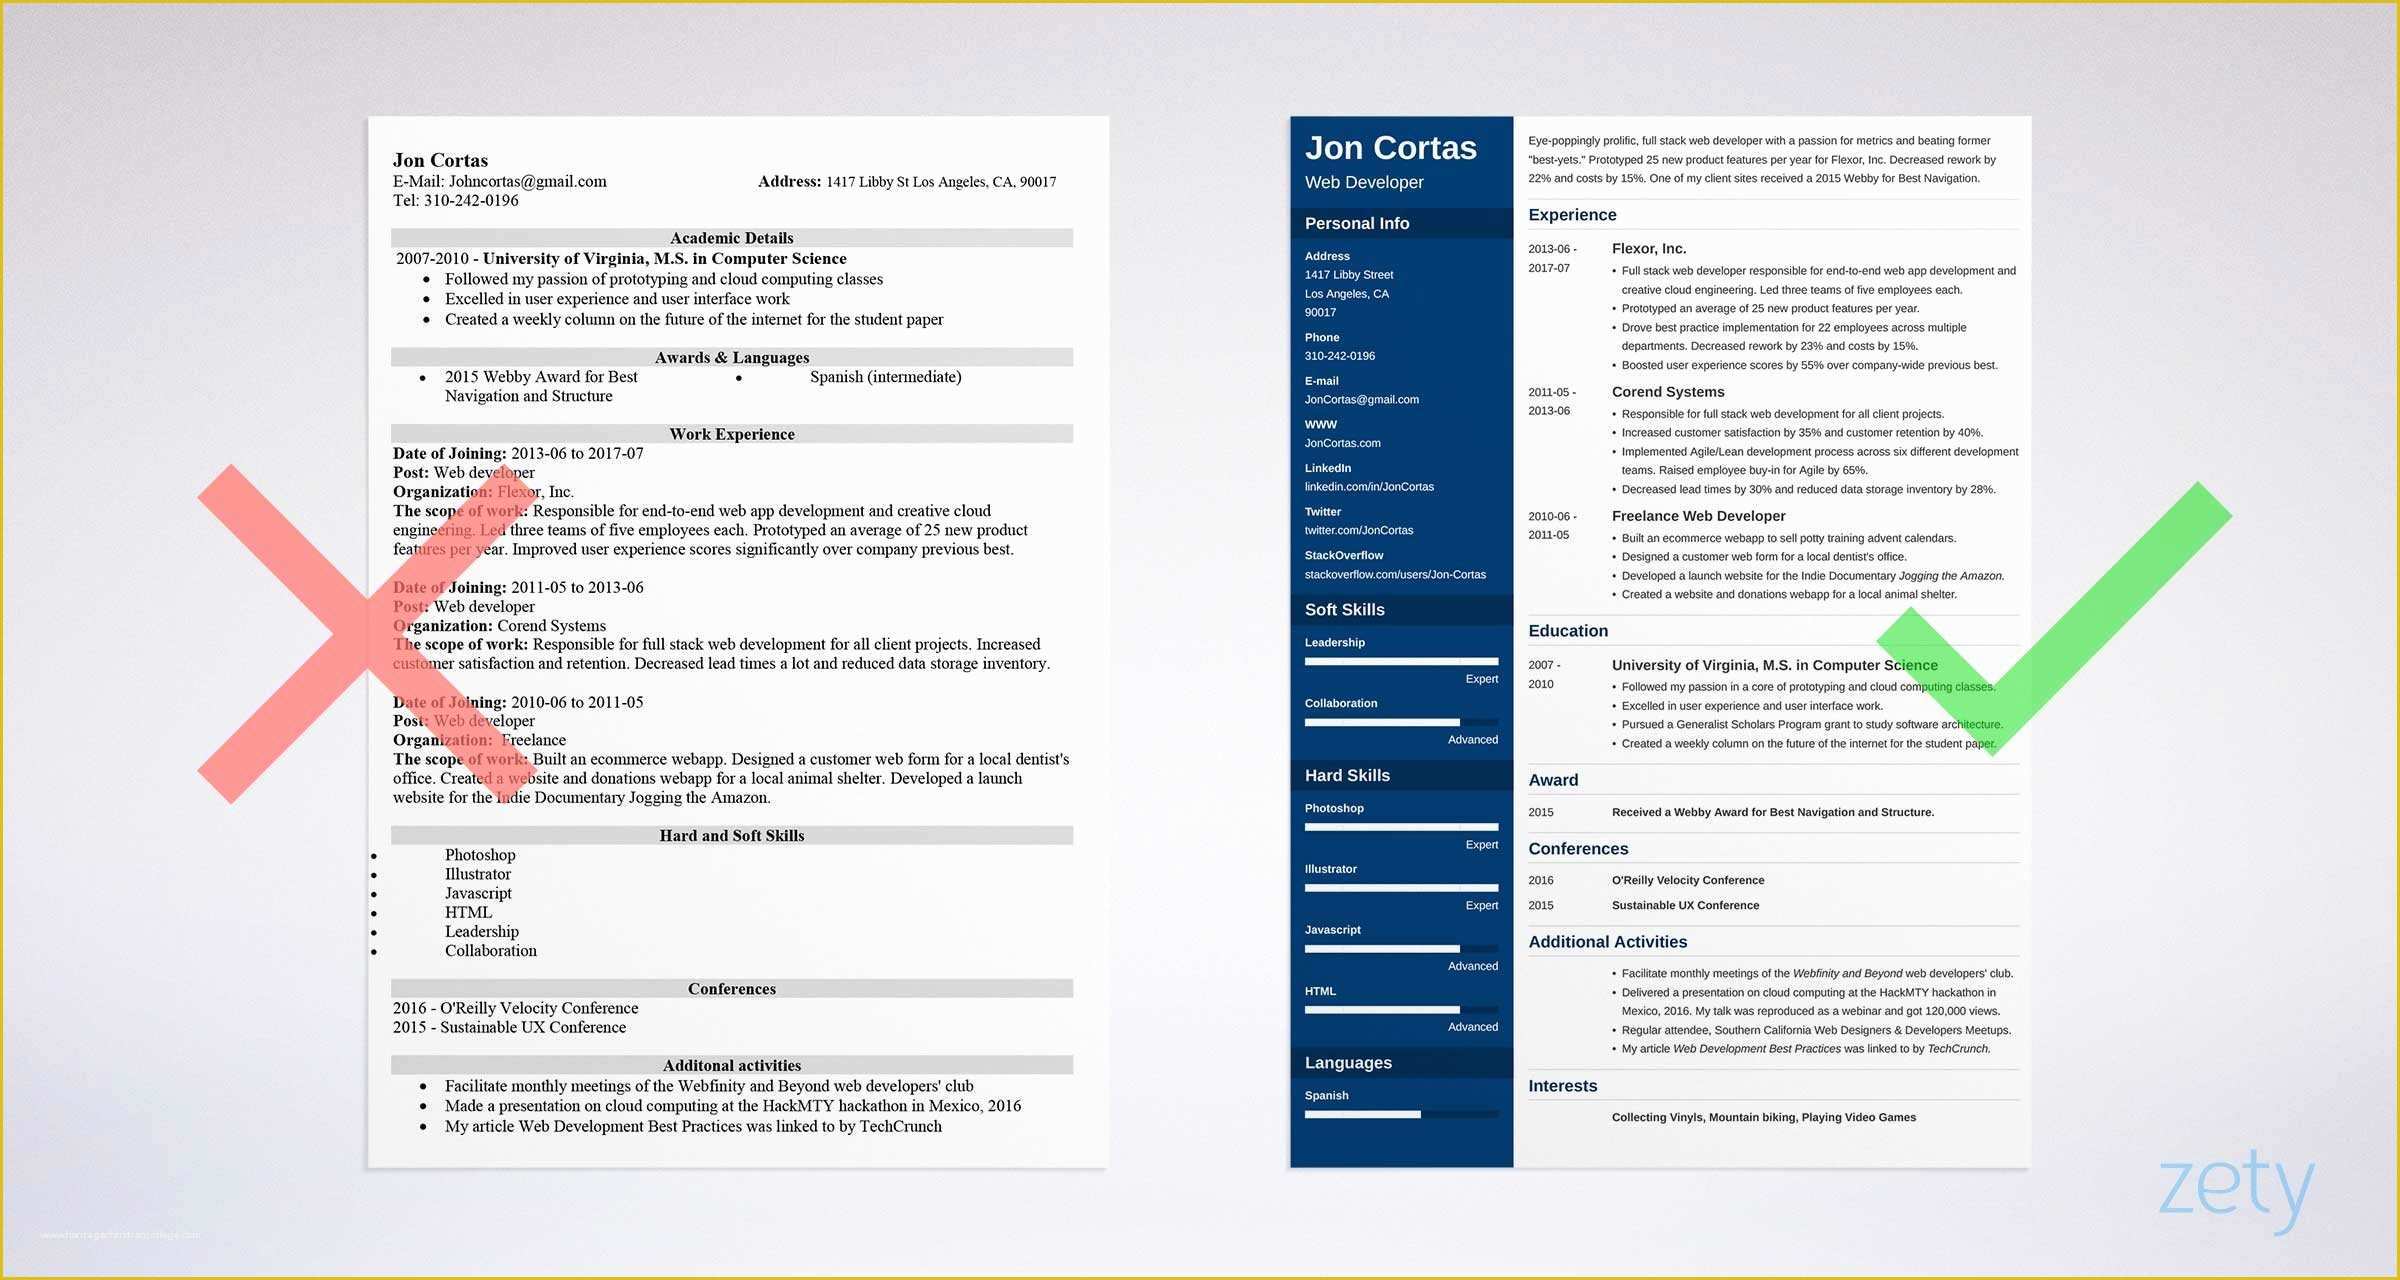 Resume Template Word Free Download Of Free Resume Templates for Word 15 Cv Resume formats to